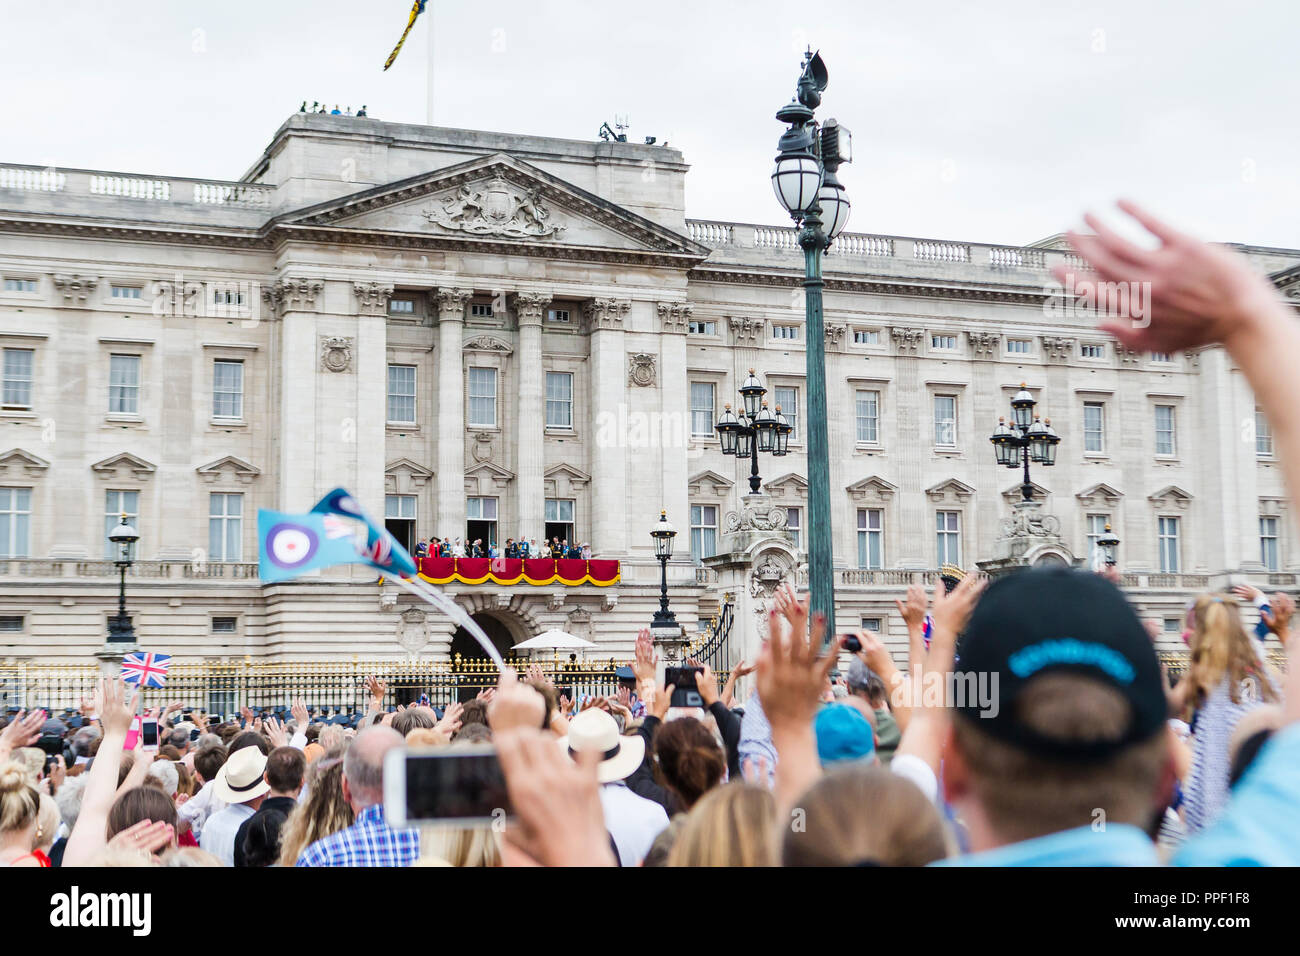 Royal Family on balcony at Buckingham Palace and crowds on The Mall during Royal Air Force's 100th Anniversary Stock Photo